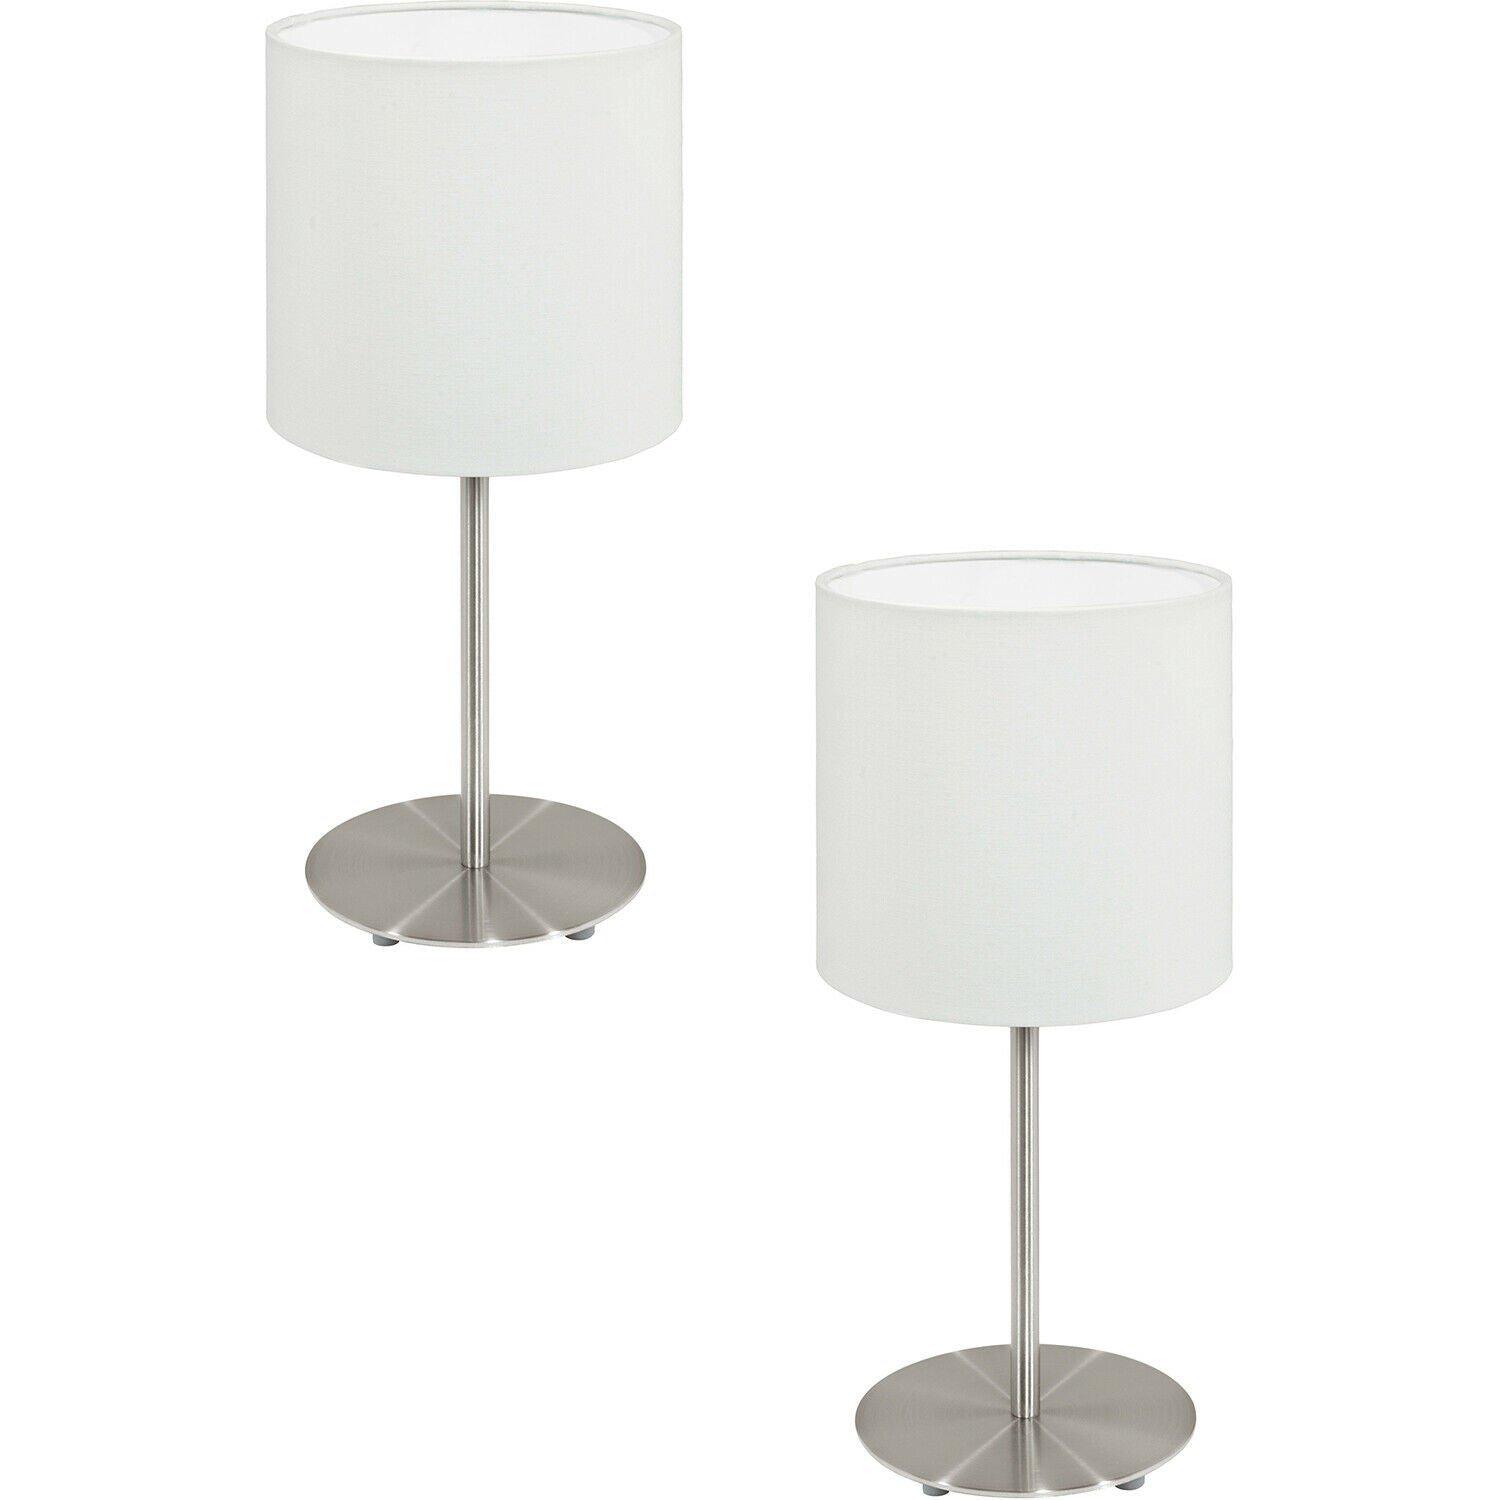 2 PACK Table Desk Lamp Colour Satin Nickel Steel Shade White Fabric E14 1x40W